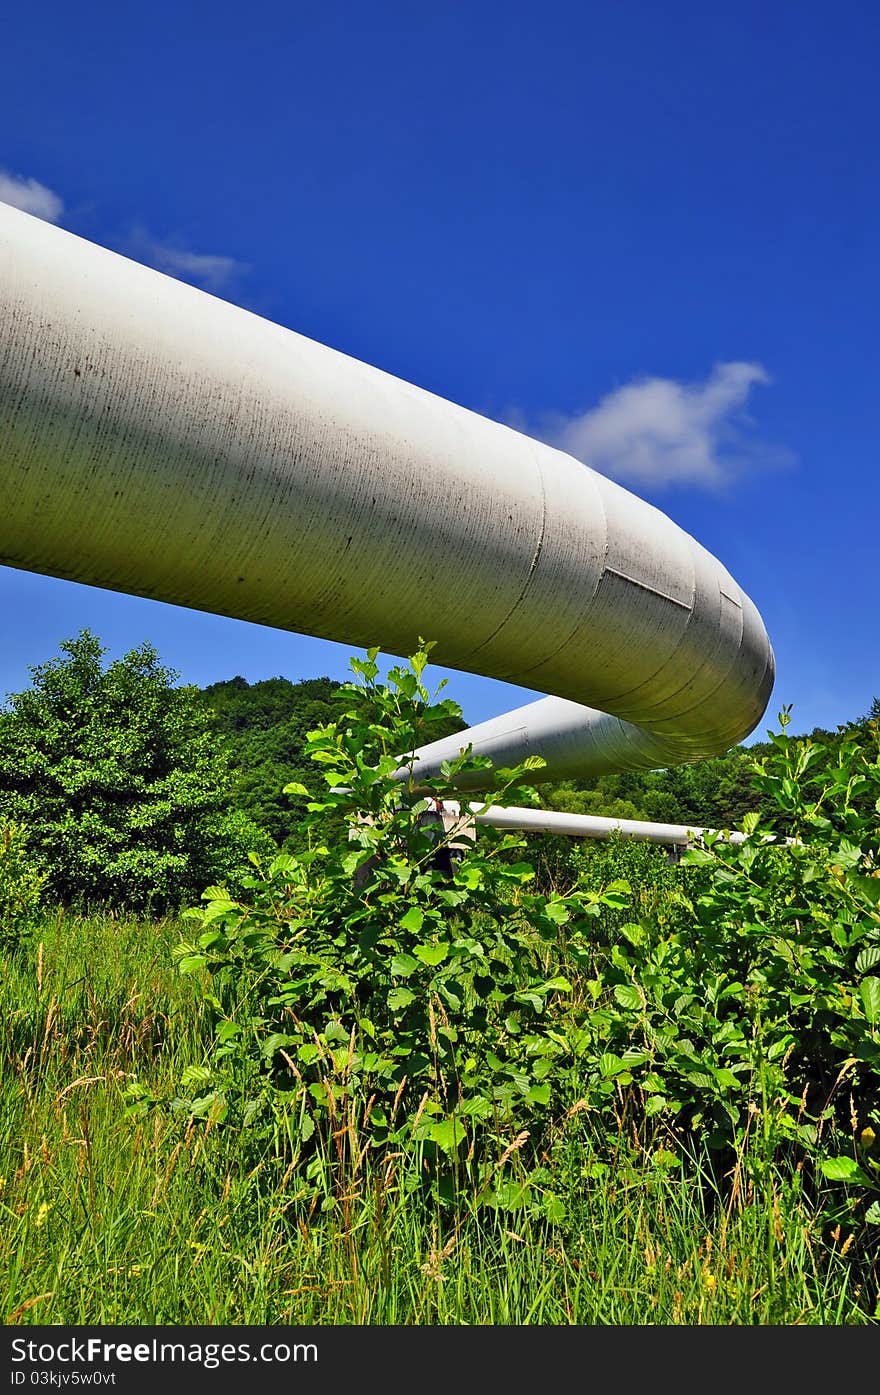 The high pressure pipeline in a summer landscape with the dark blue sky and clouds